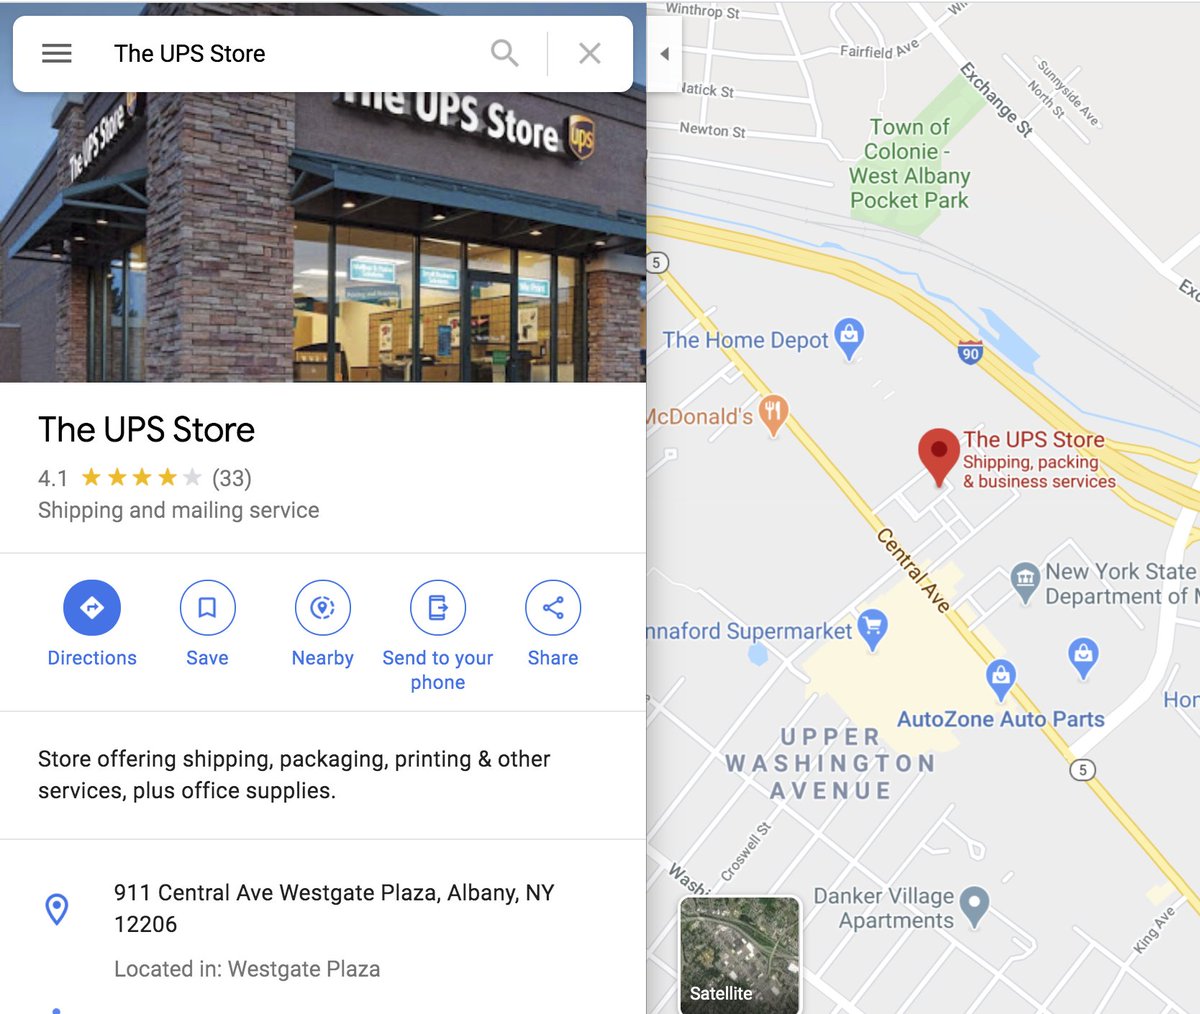 They registered their NY charity with an Albany address which is also a UPS Store.  https://www.charitynavigator.org/index.cfm?bay=search.profile&ein=822402210